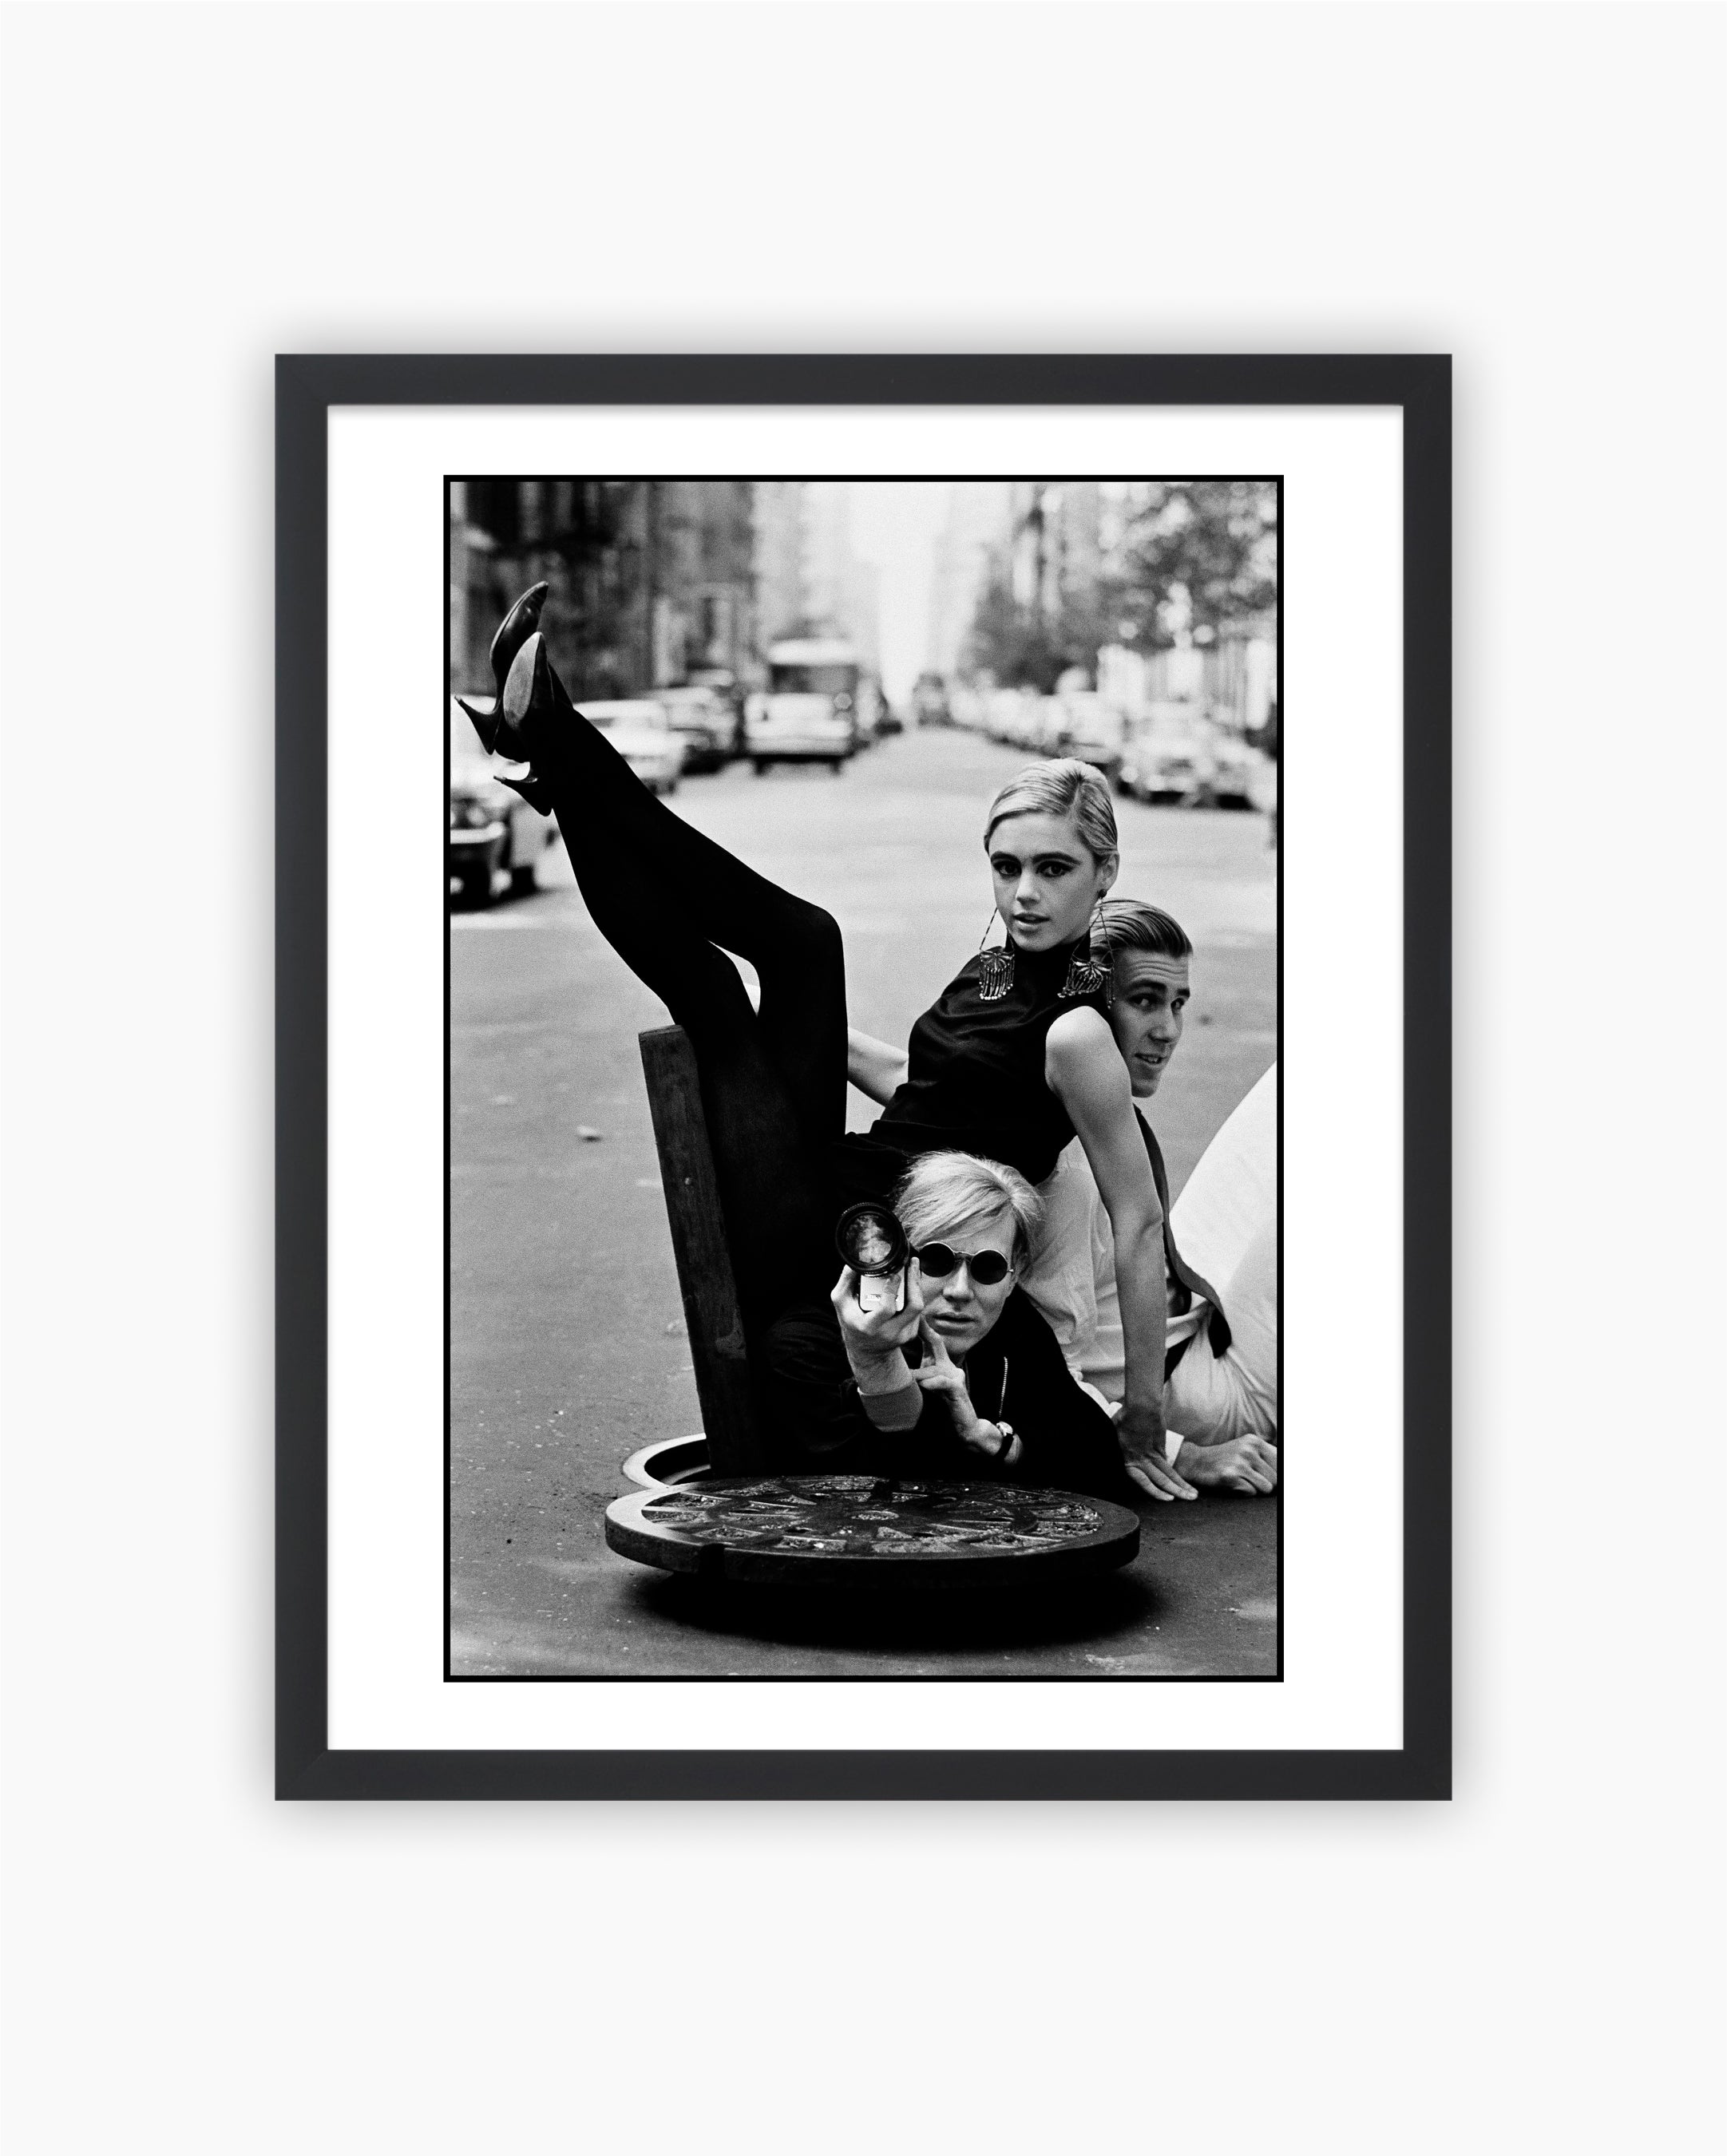 Magnum Editions: Andy Warhol, Edie Sedgwick and Chuck Wein in New York, 1965